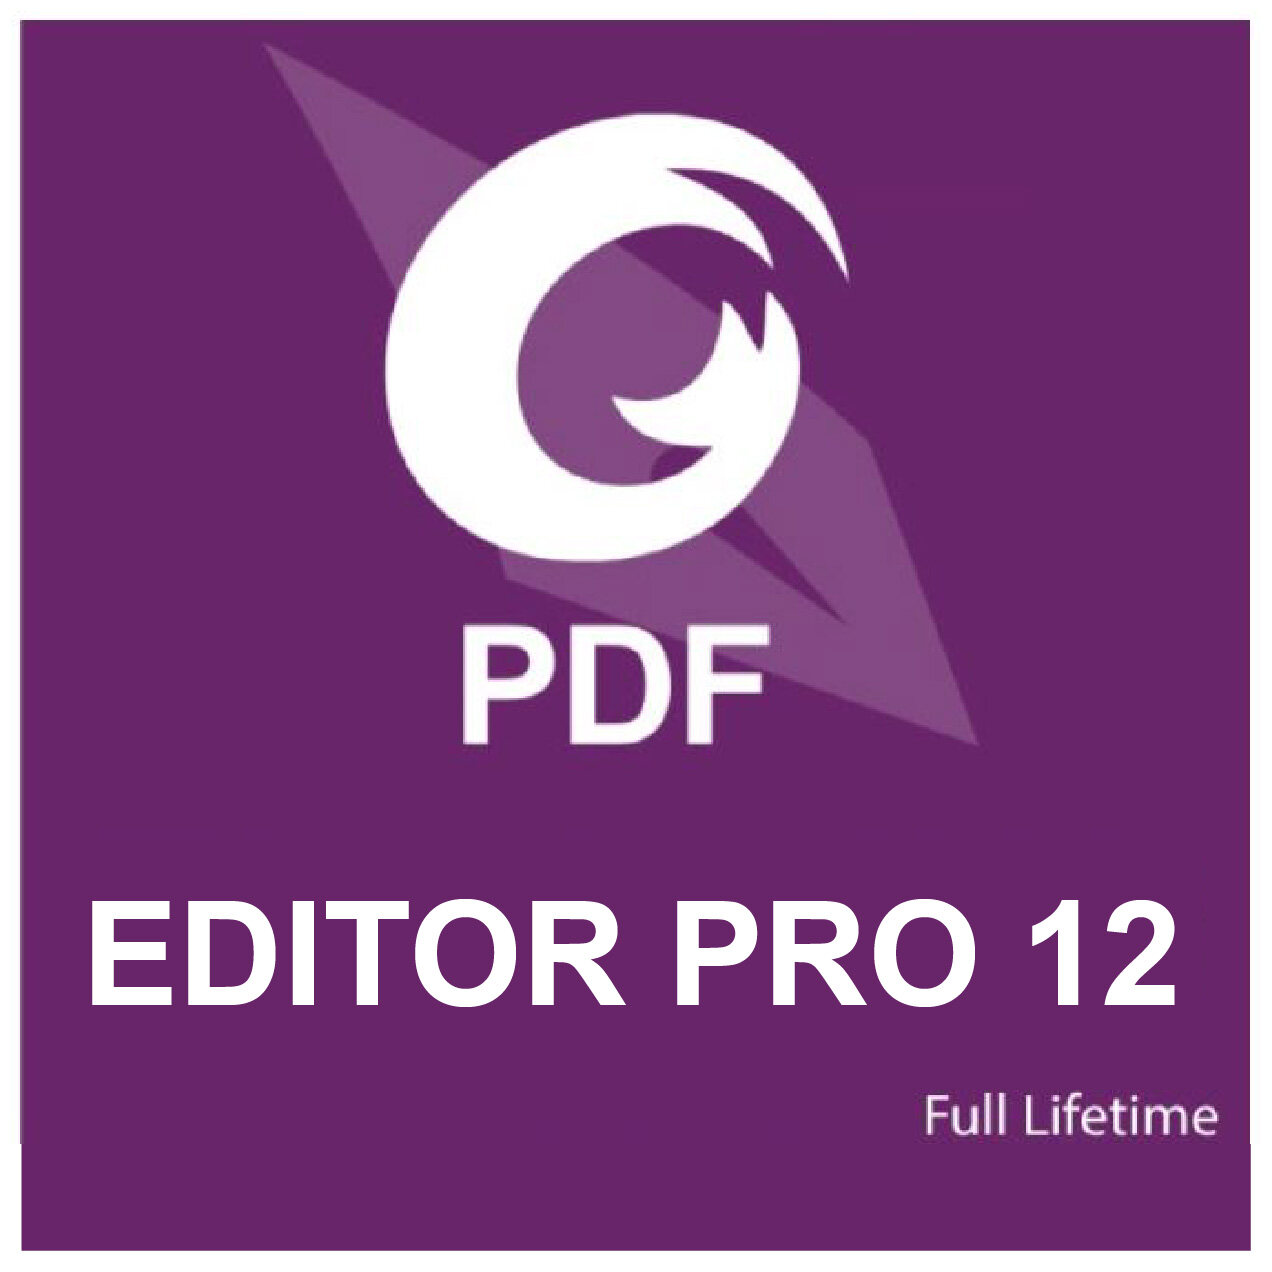 Foxit PDF Editor Pro 13.0.0.21632 instal the new version for windows